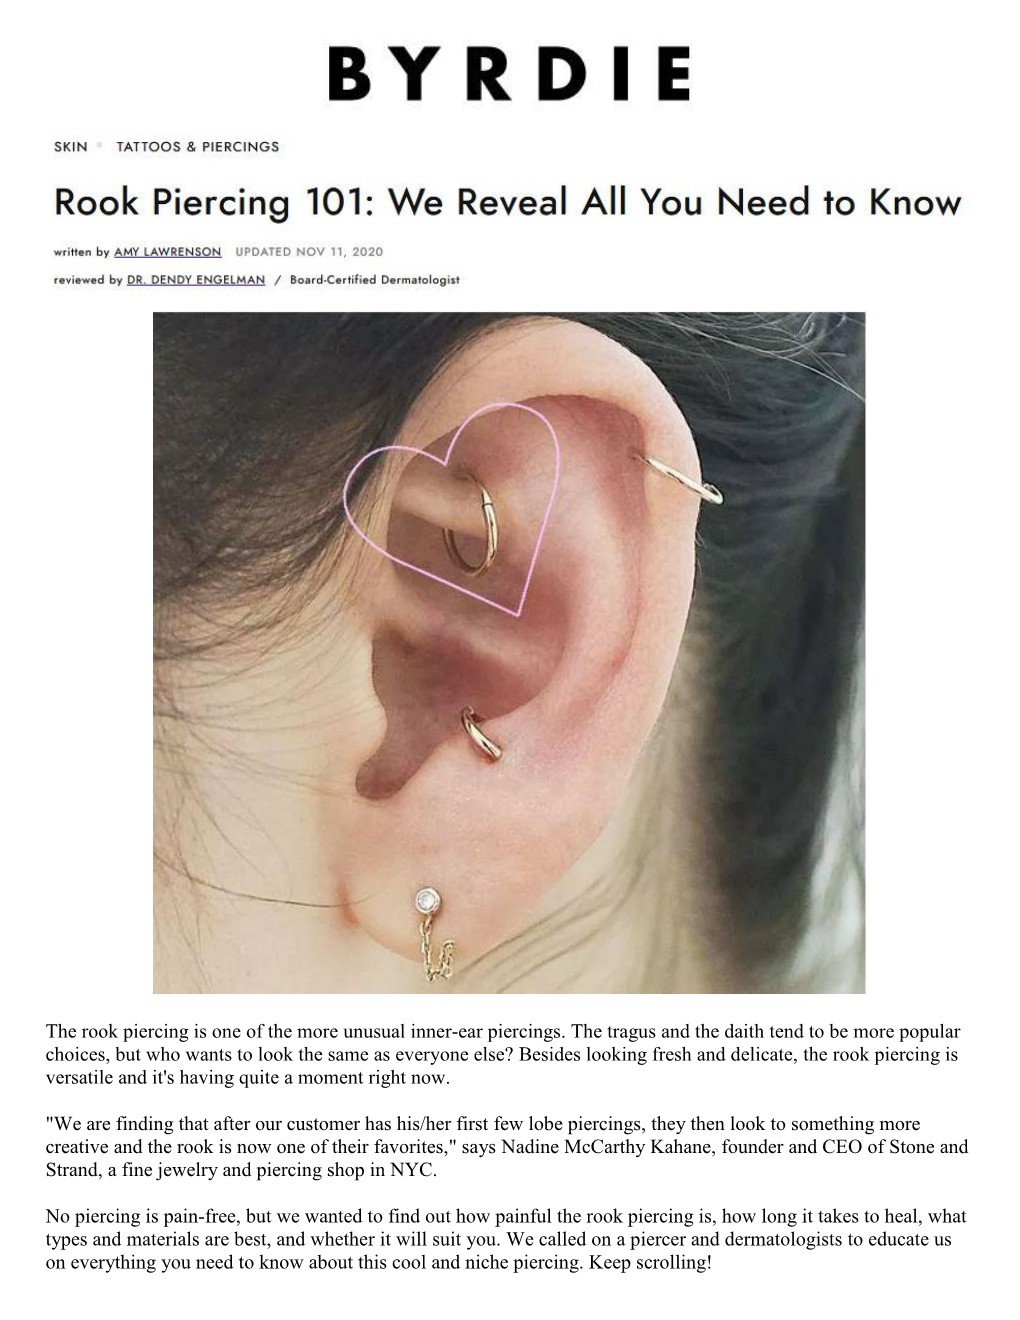 The Rook Piercing Is One of the More Unusual Inner-Ear Piercings. The